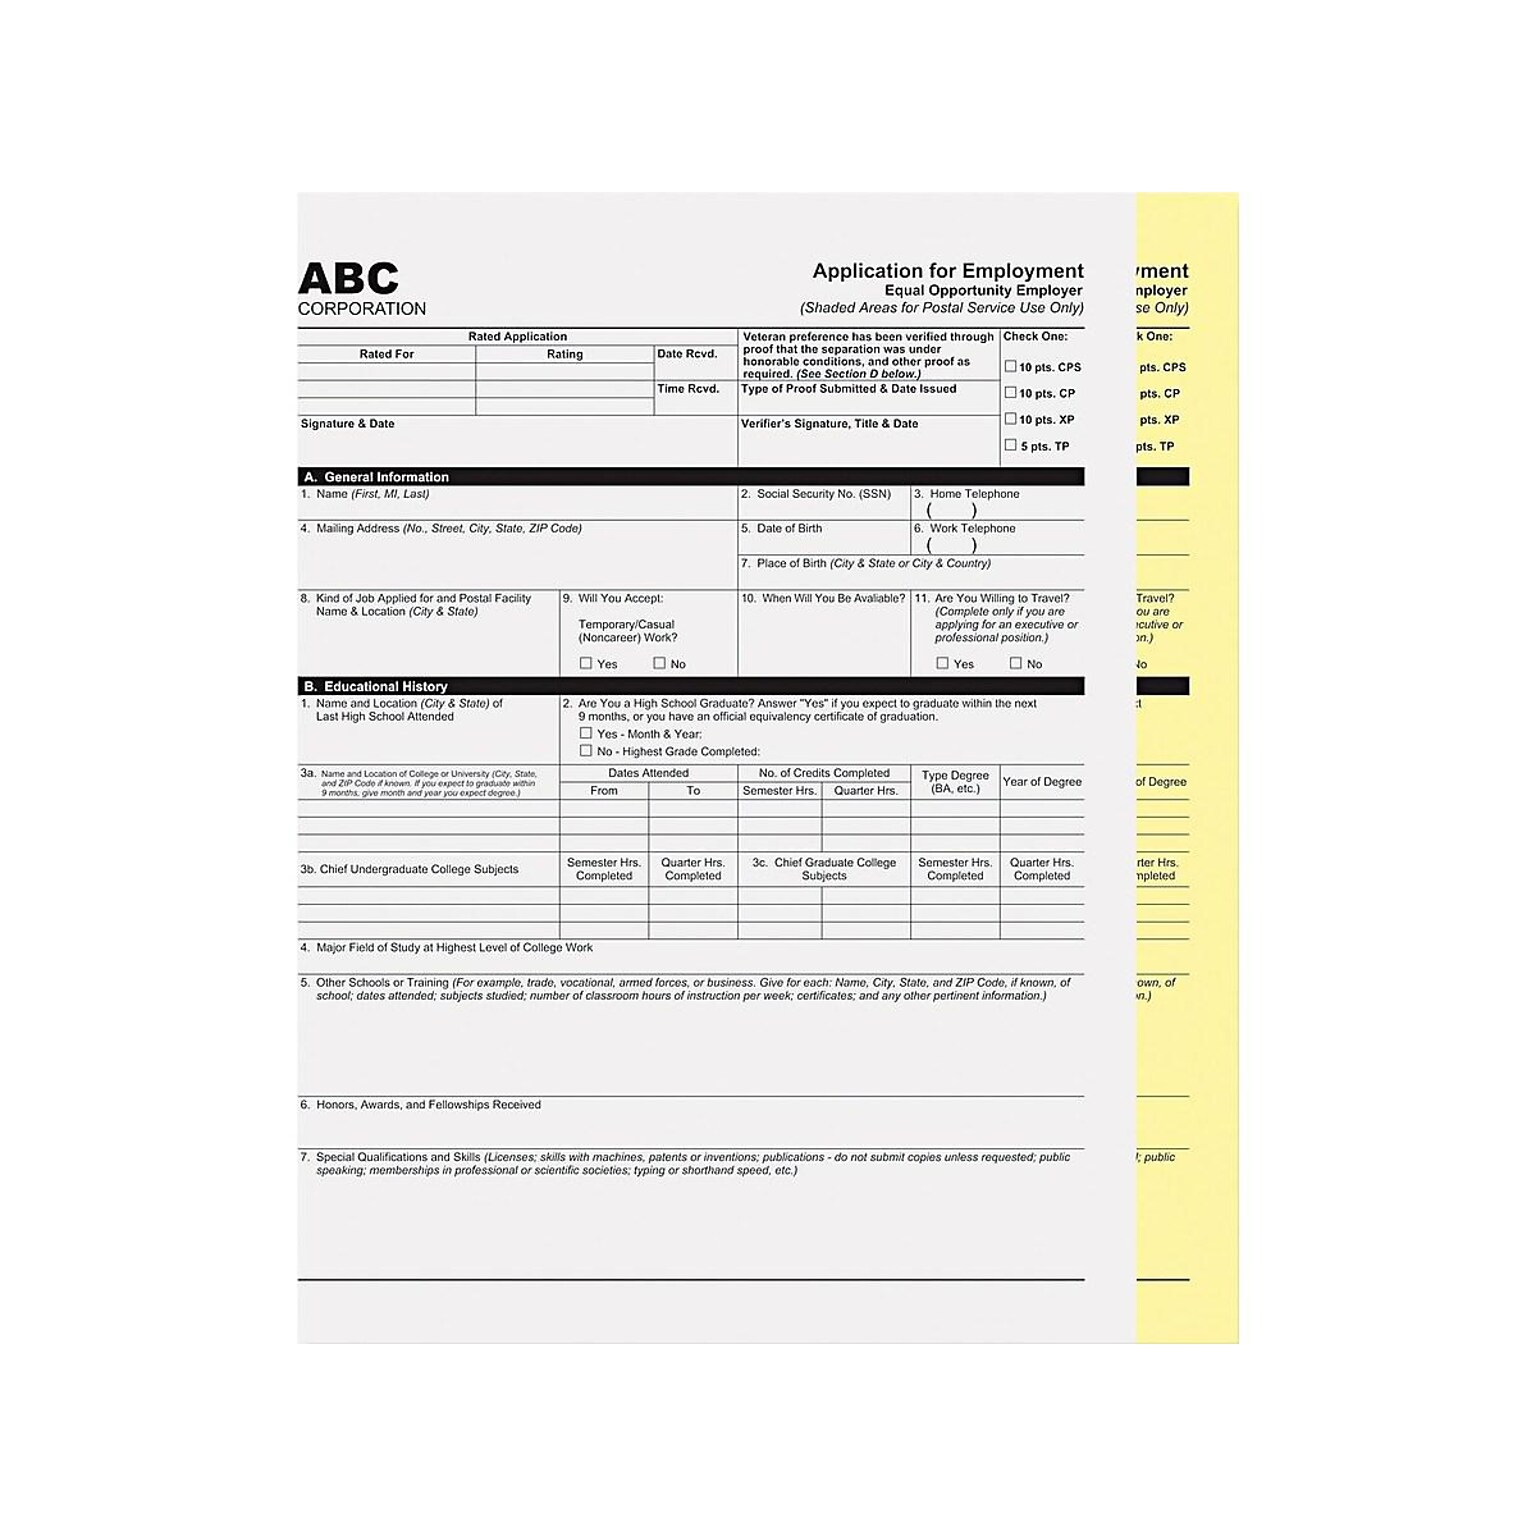 PM Company Carbonless Paper, 20 lbs, 8.5 x 11, White/Canary, 1250/Carton (59104)